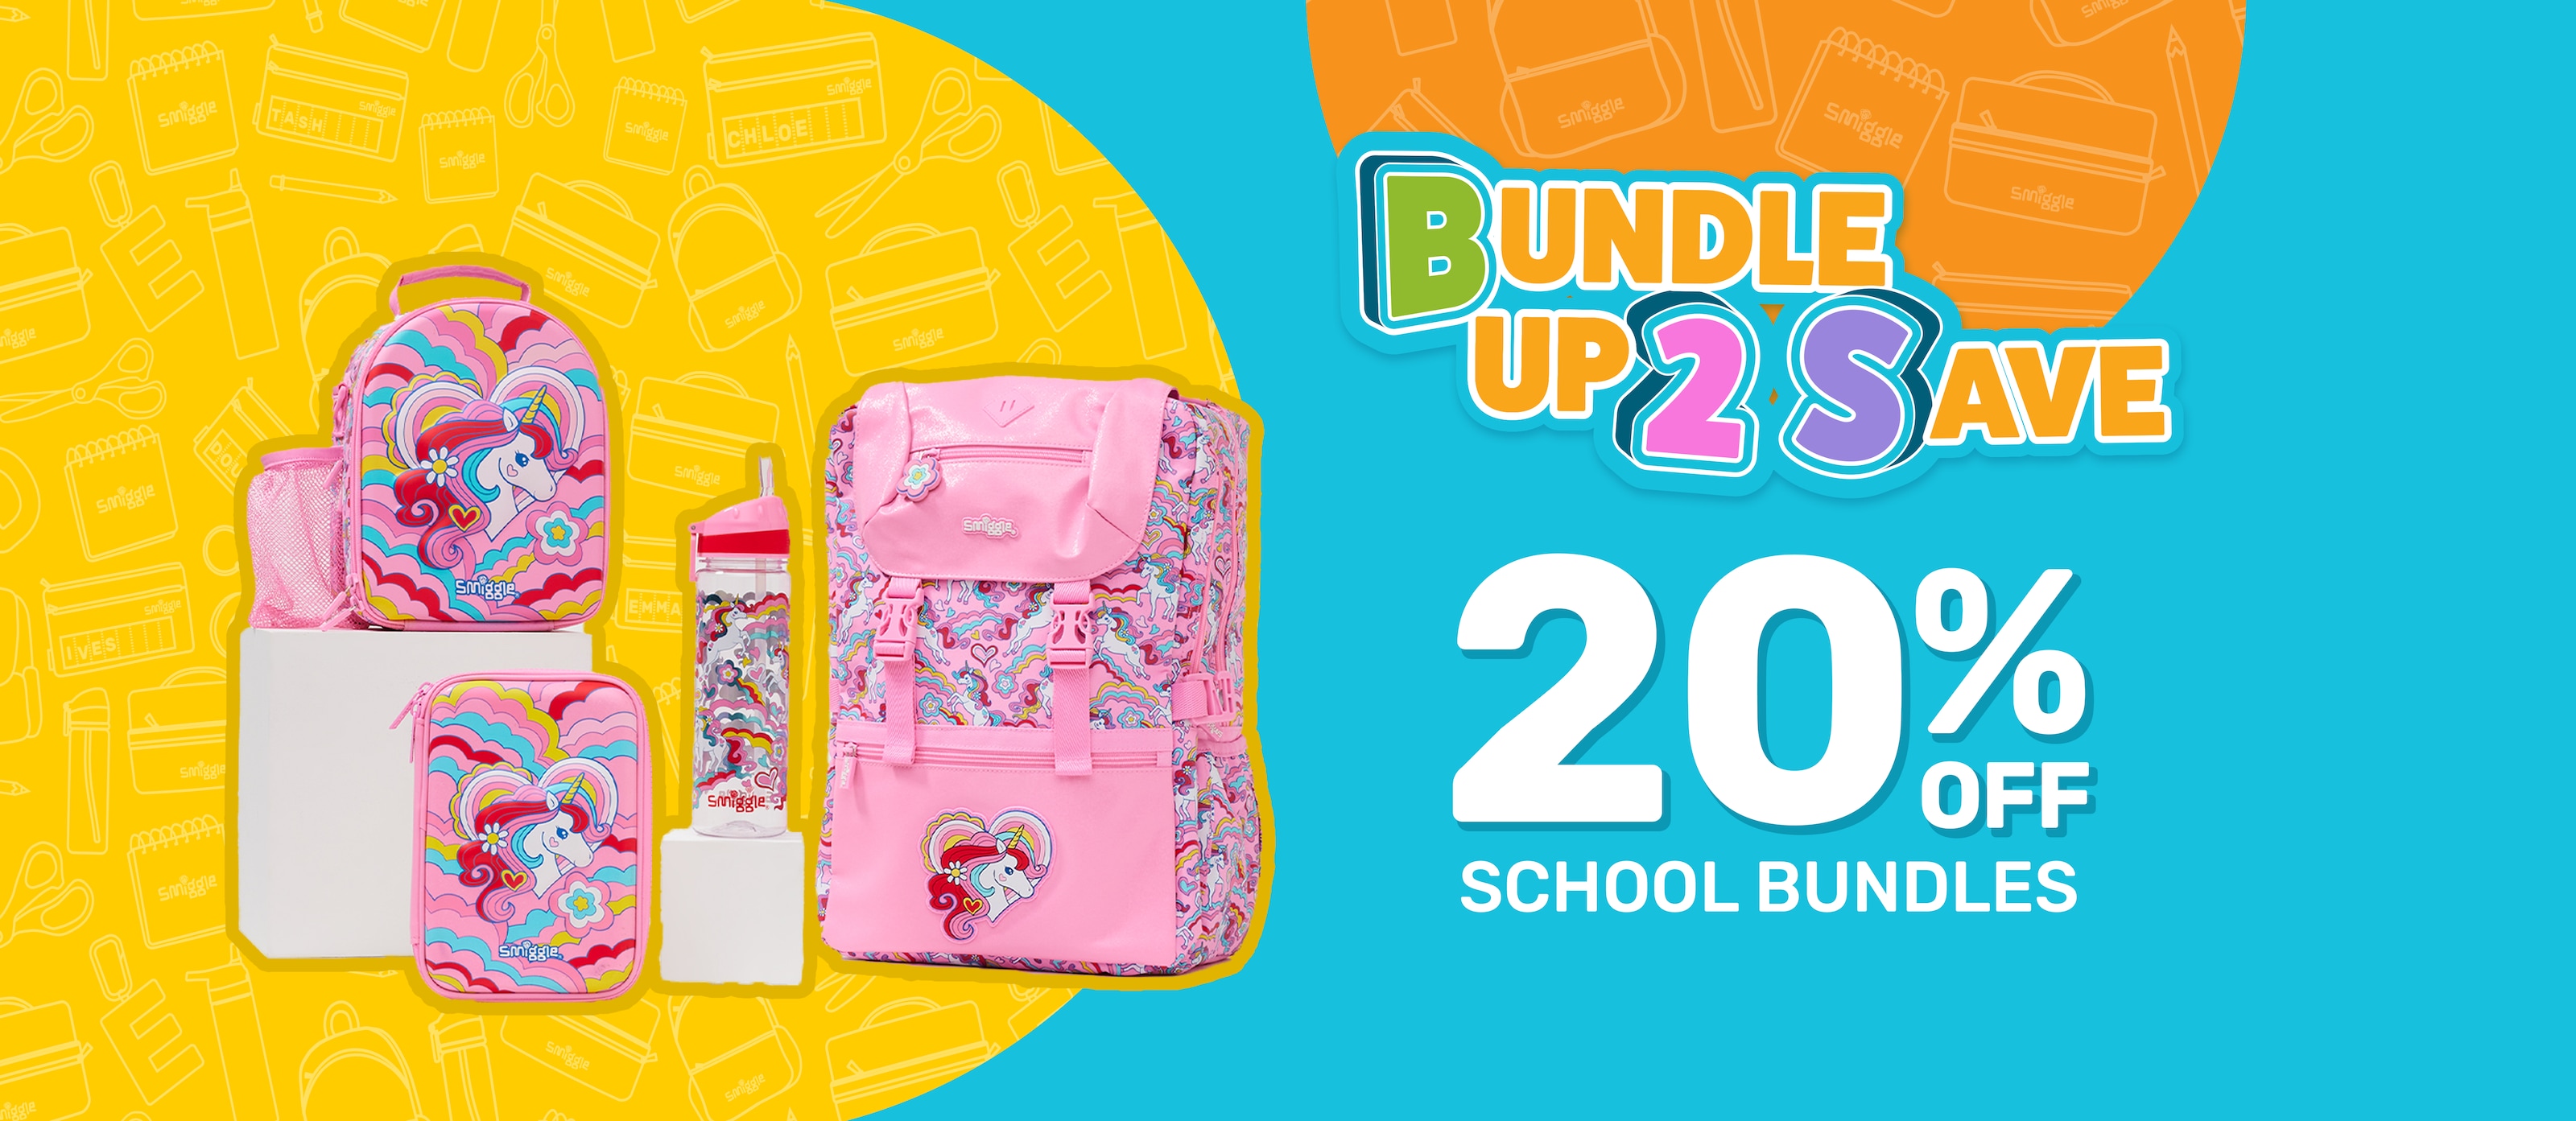 https://smiggle.jgl.co.nz/SM/aurora/images/espot/home/SM240108_AUNZ_B2S_Offers/SM240108_Bundles_Hero2.png?impolicy=scale